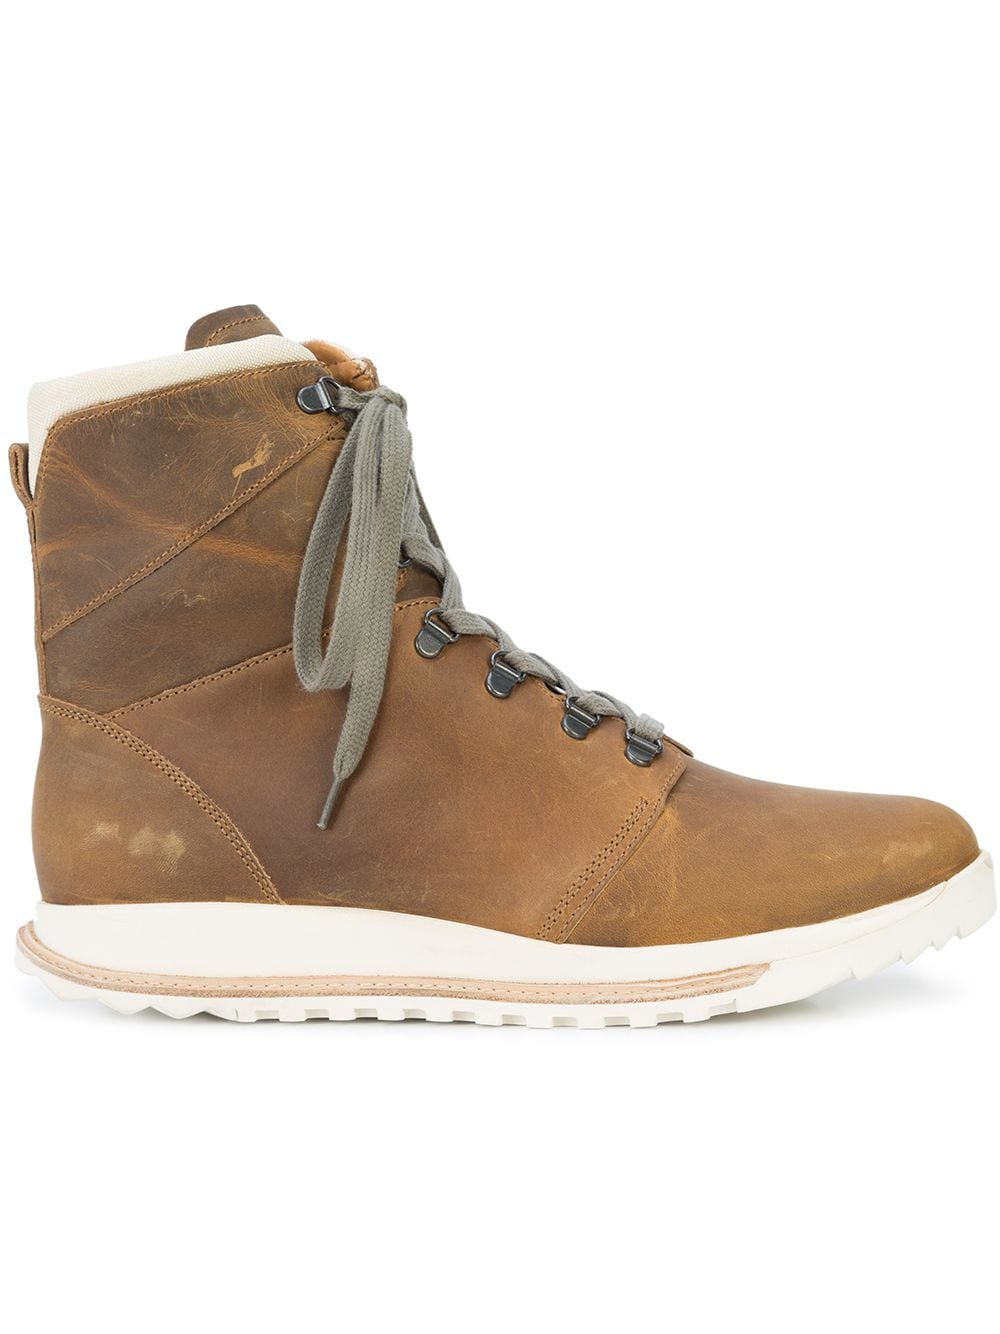 Rick Owens Lace-up Hi Top Sneakers - Farfetch